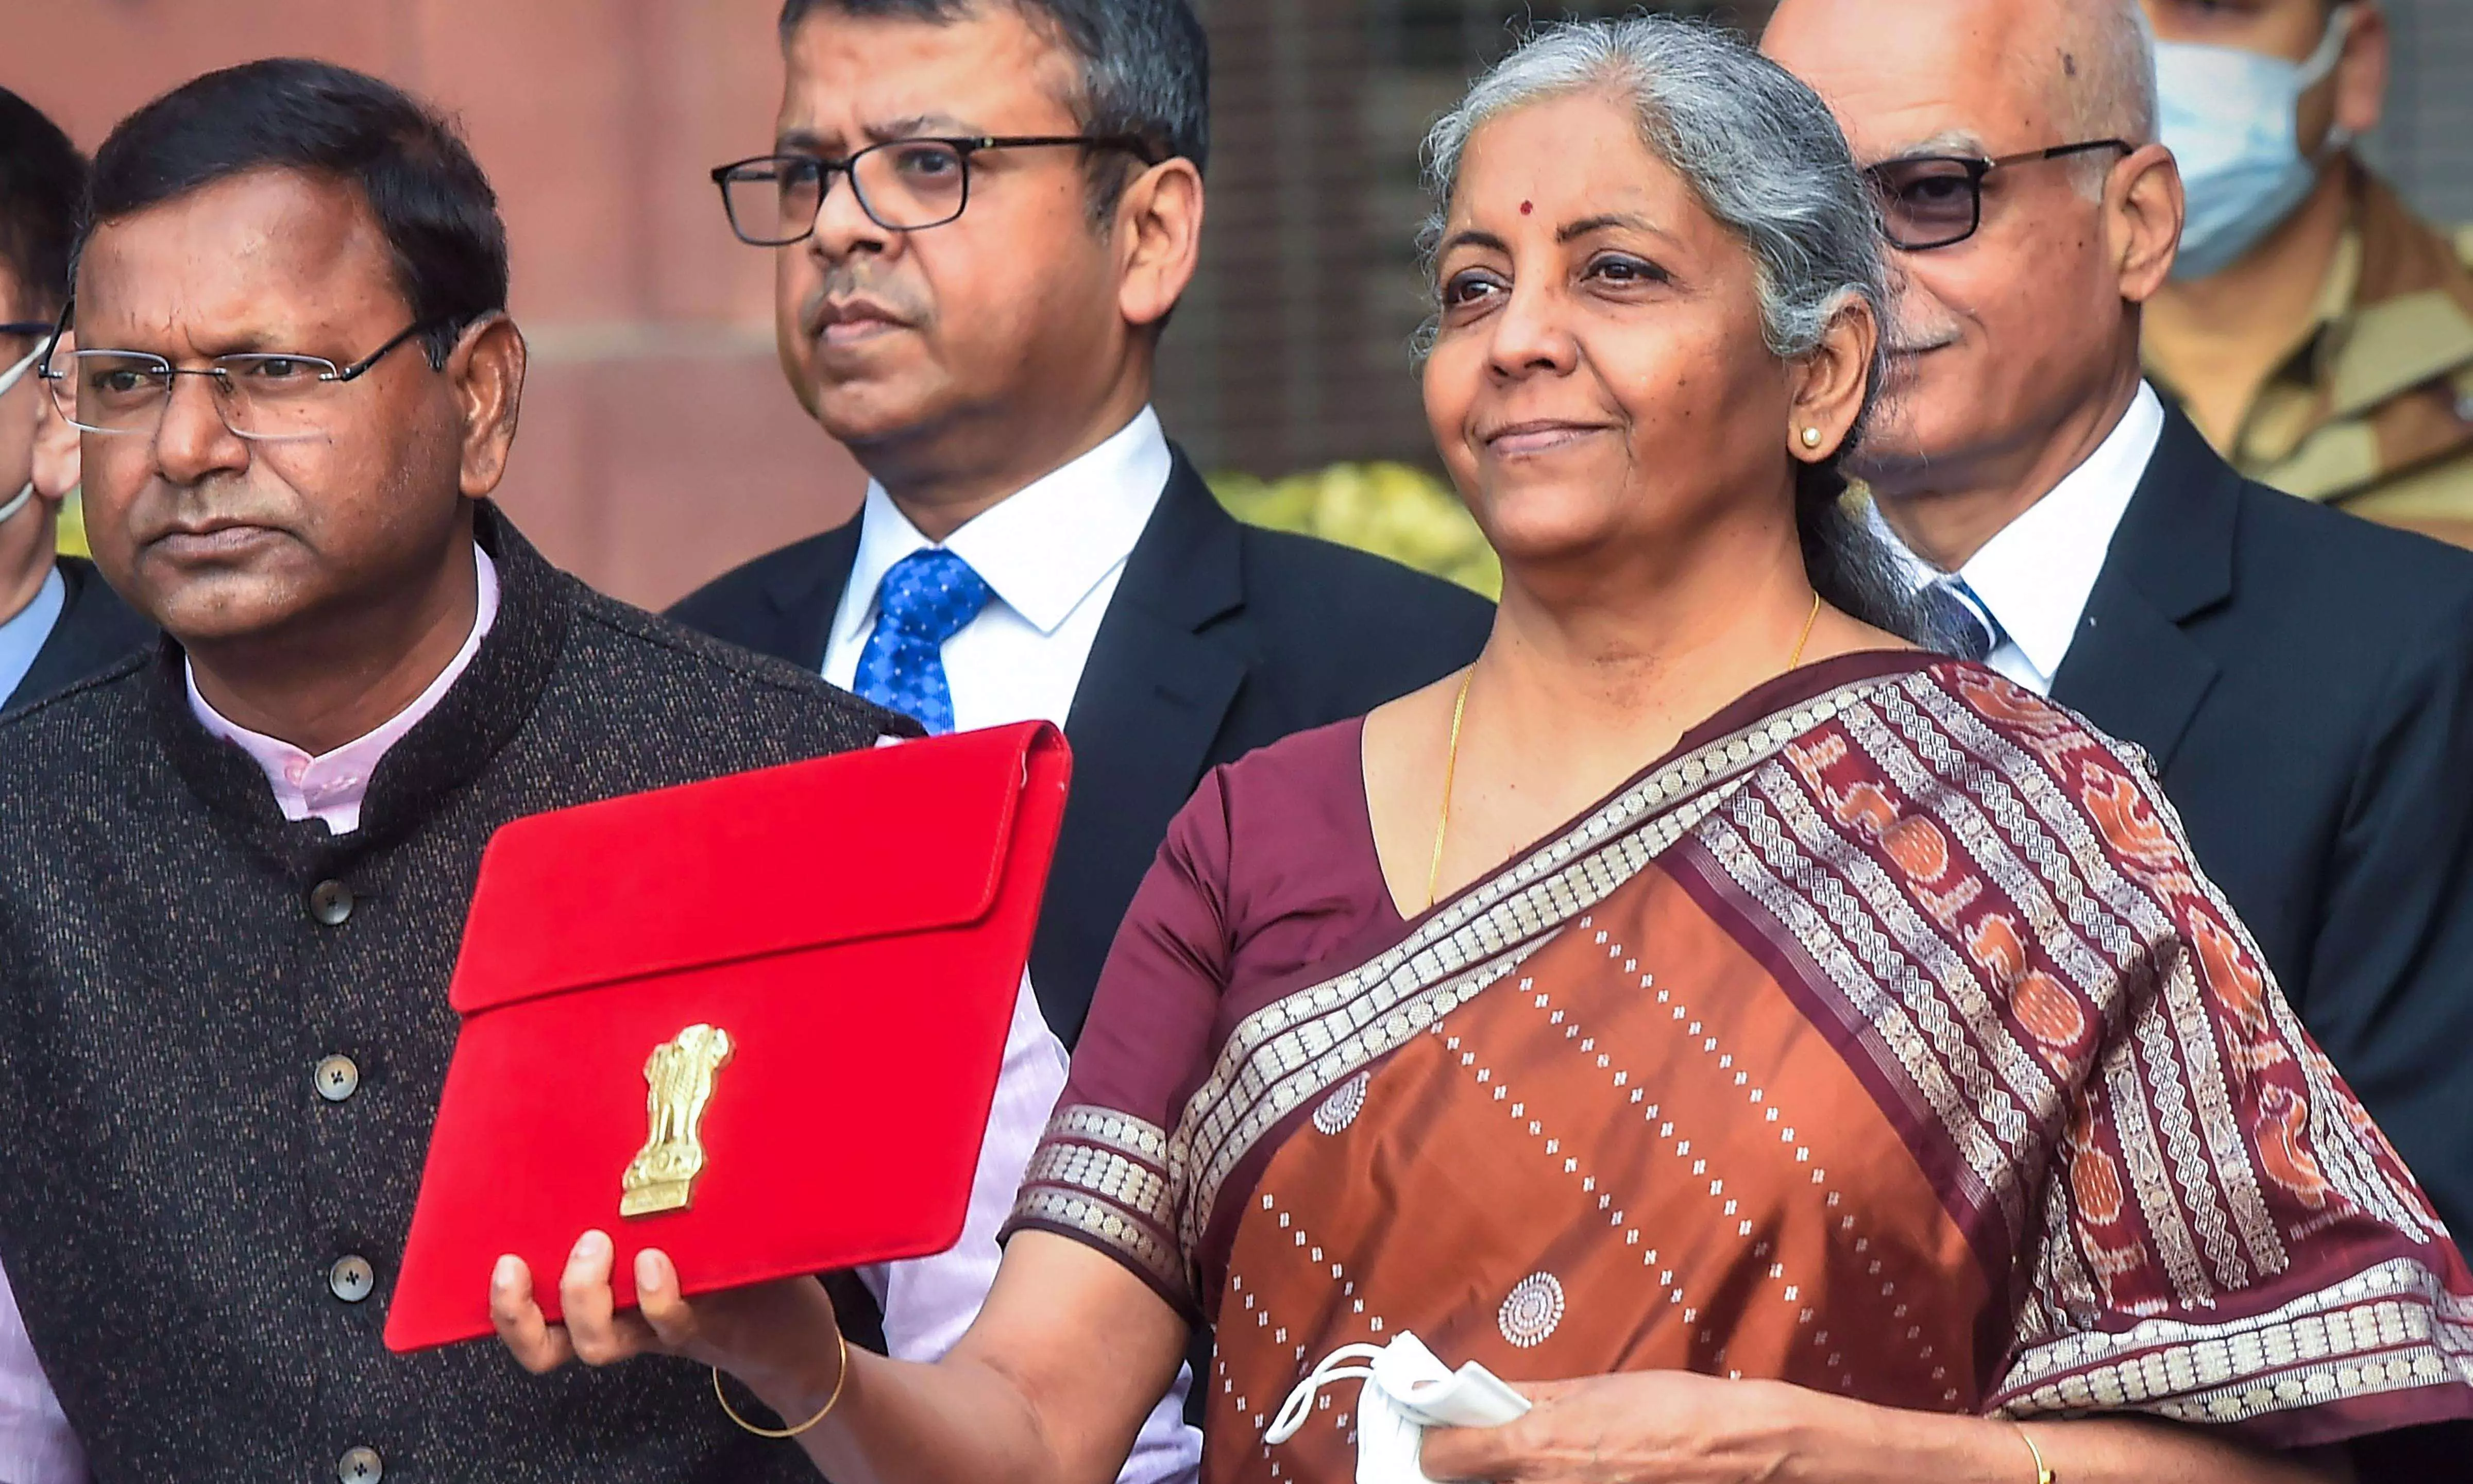 sitharaman takes tablet in red pouch to parliament to present paperless budget